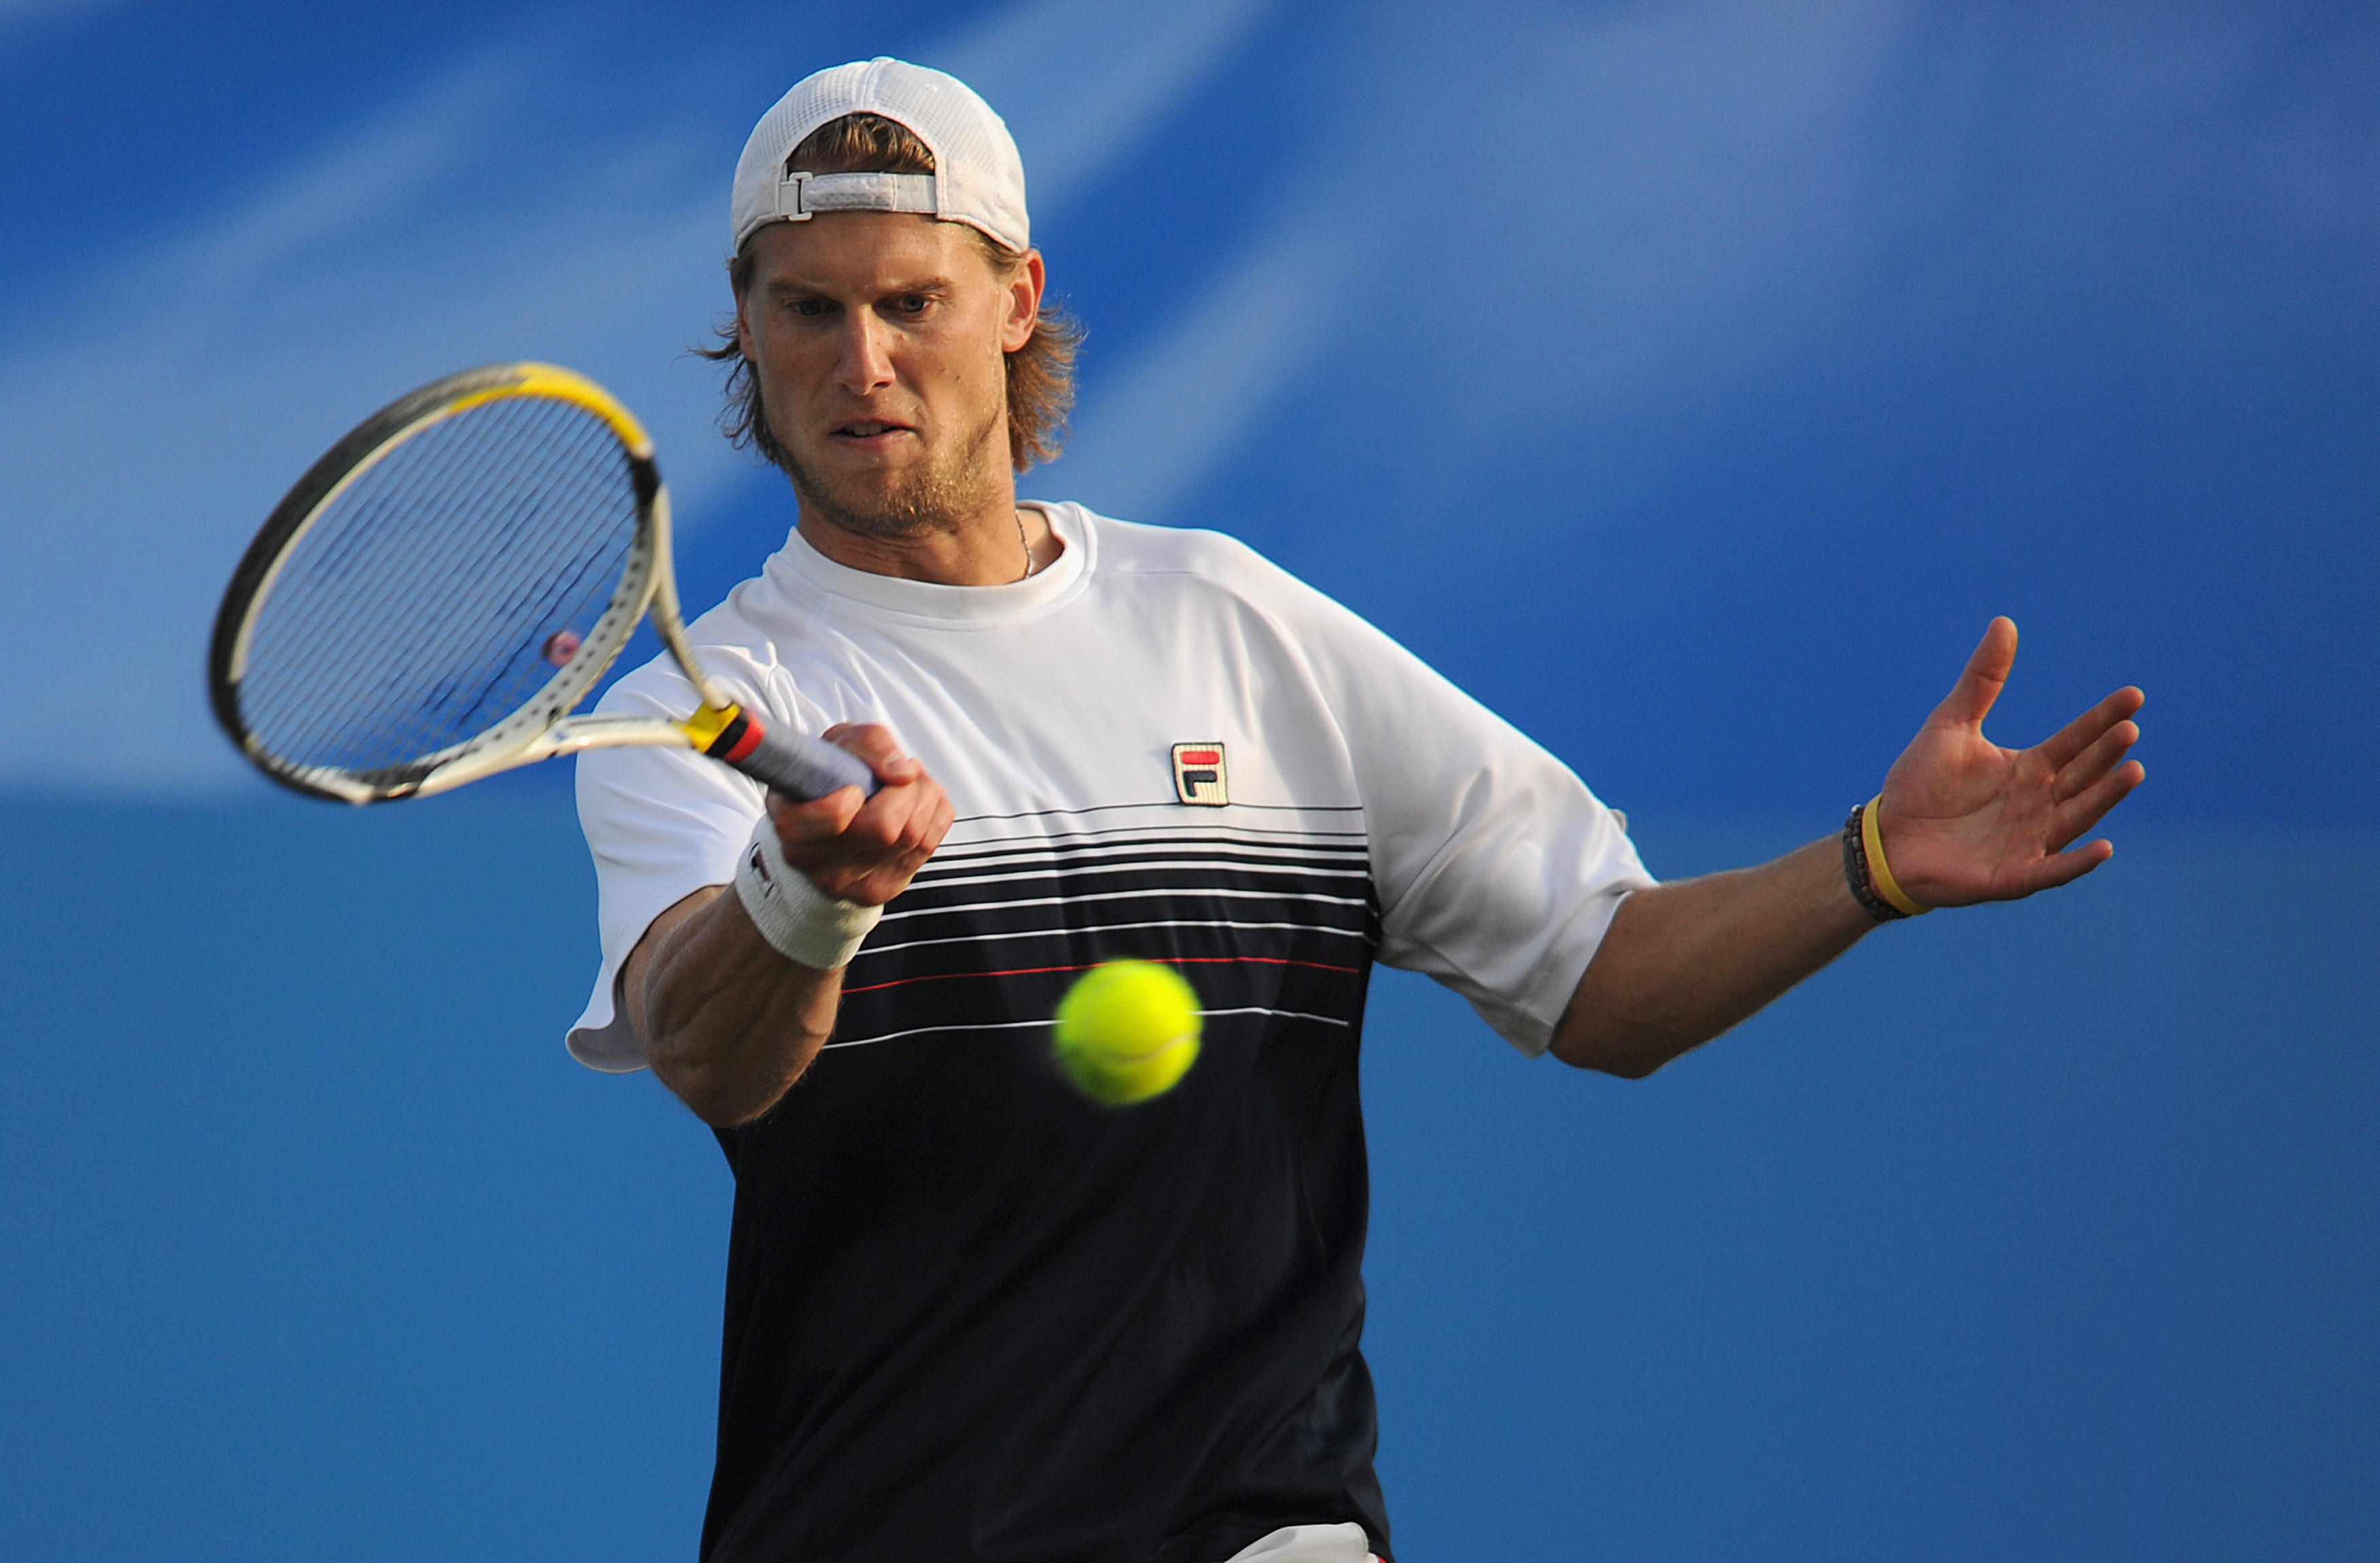 EASTBOURNE, ENGLAND - JUNE 18:  Andreas Seppi of Italy plays a shot in his final against Janko Tipsarevic of Serbia during day 8 of the AEGON International tennis tournament on June 18, 2011 in Eastbourne, England.  (Photo by Michael Regan/Getty Images)